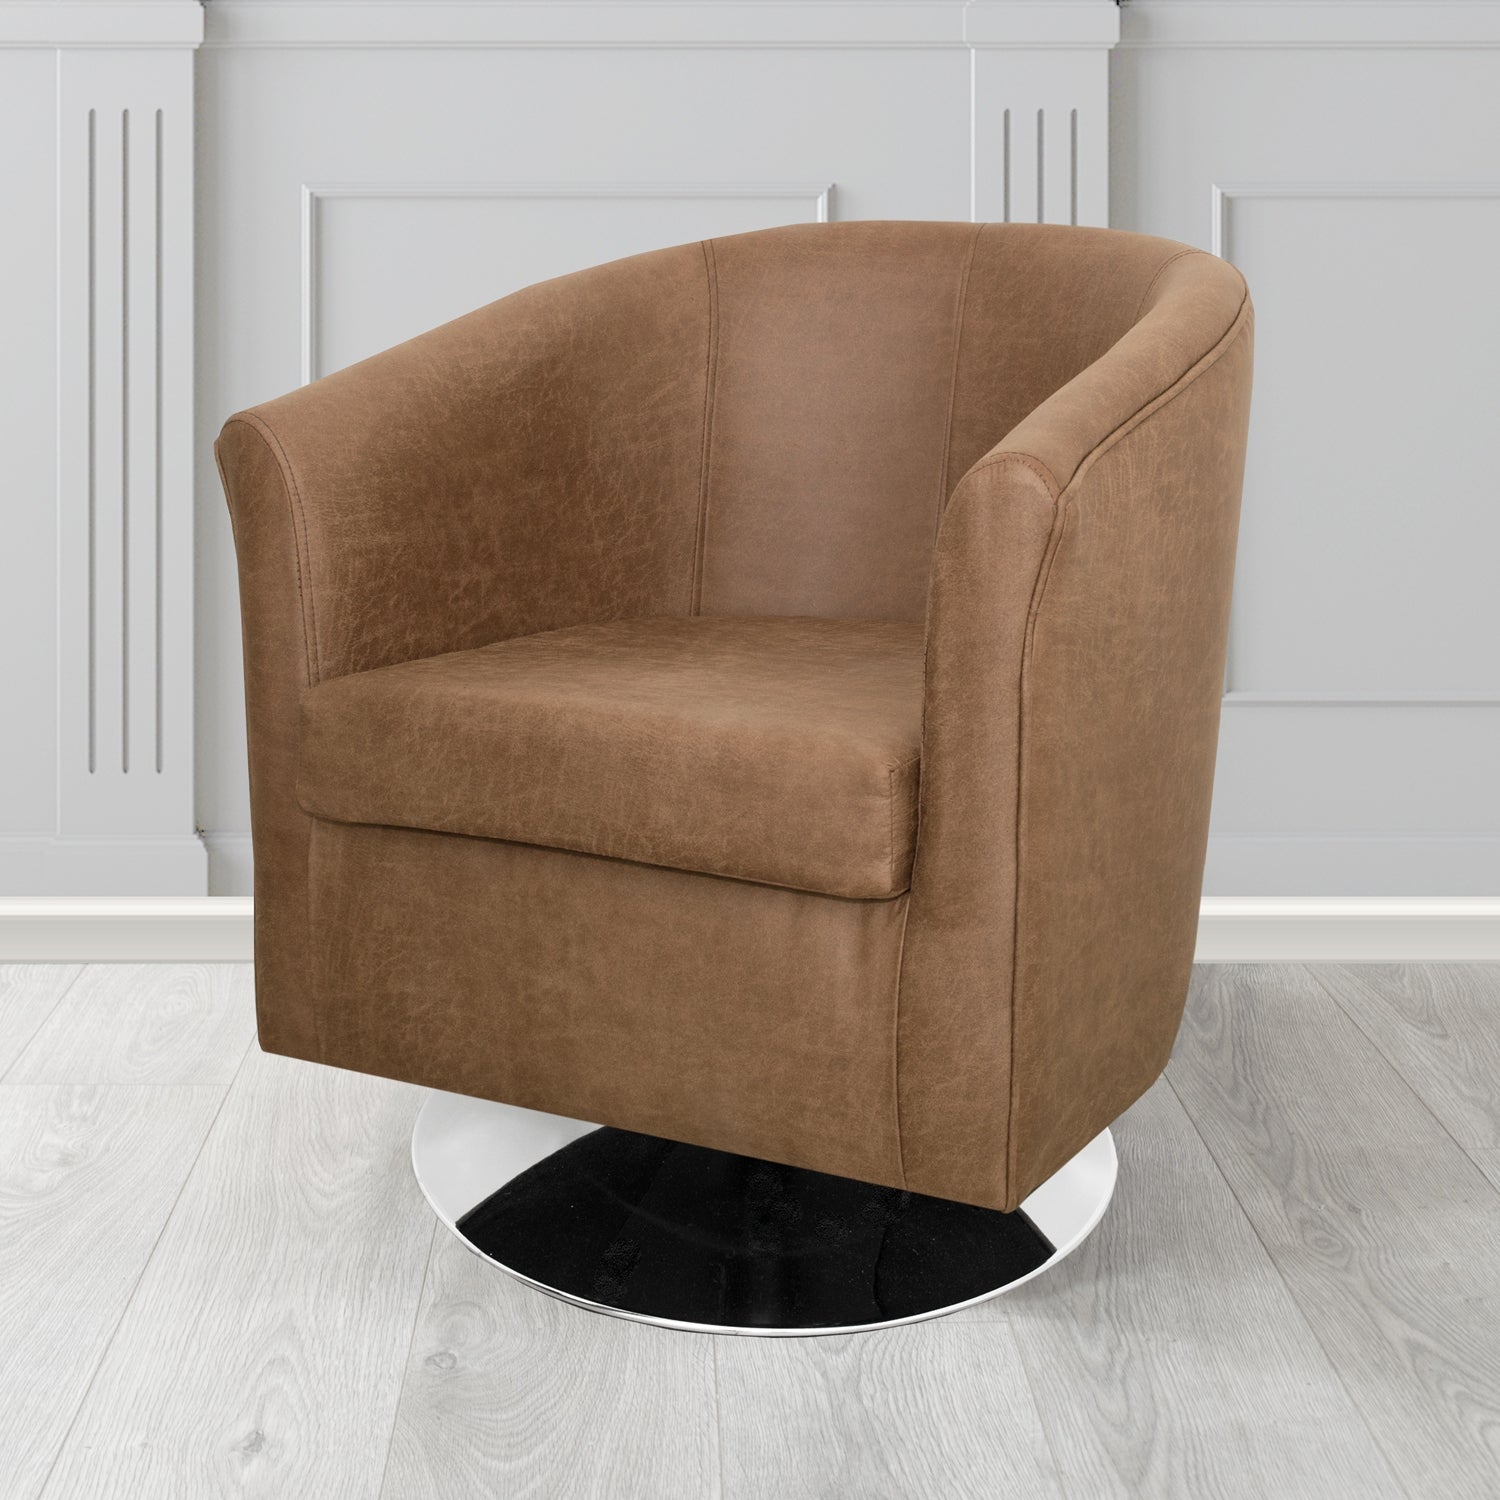 Tuscany Swivel Tub Chair in Nevada Tan Faux Leather - The Tub Chair Shop